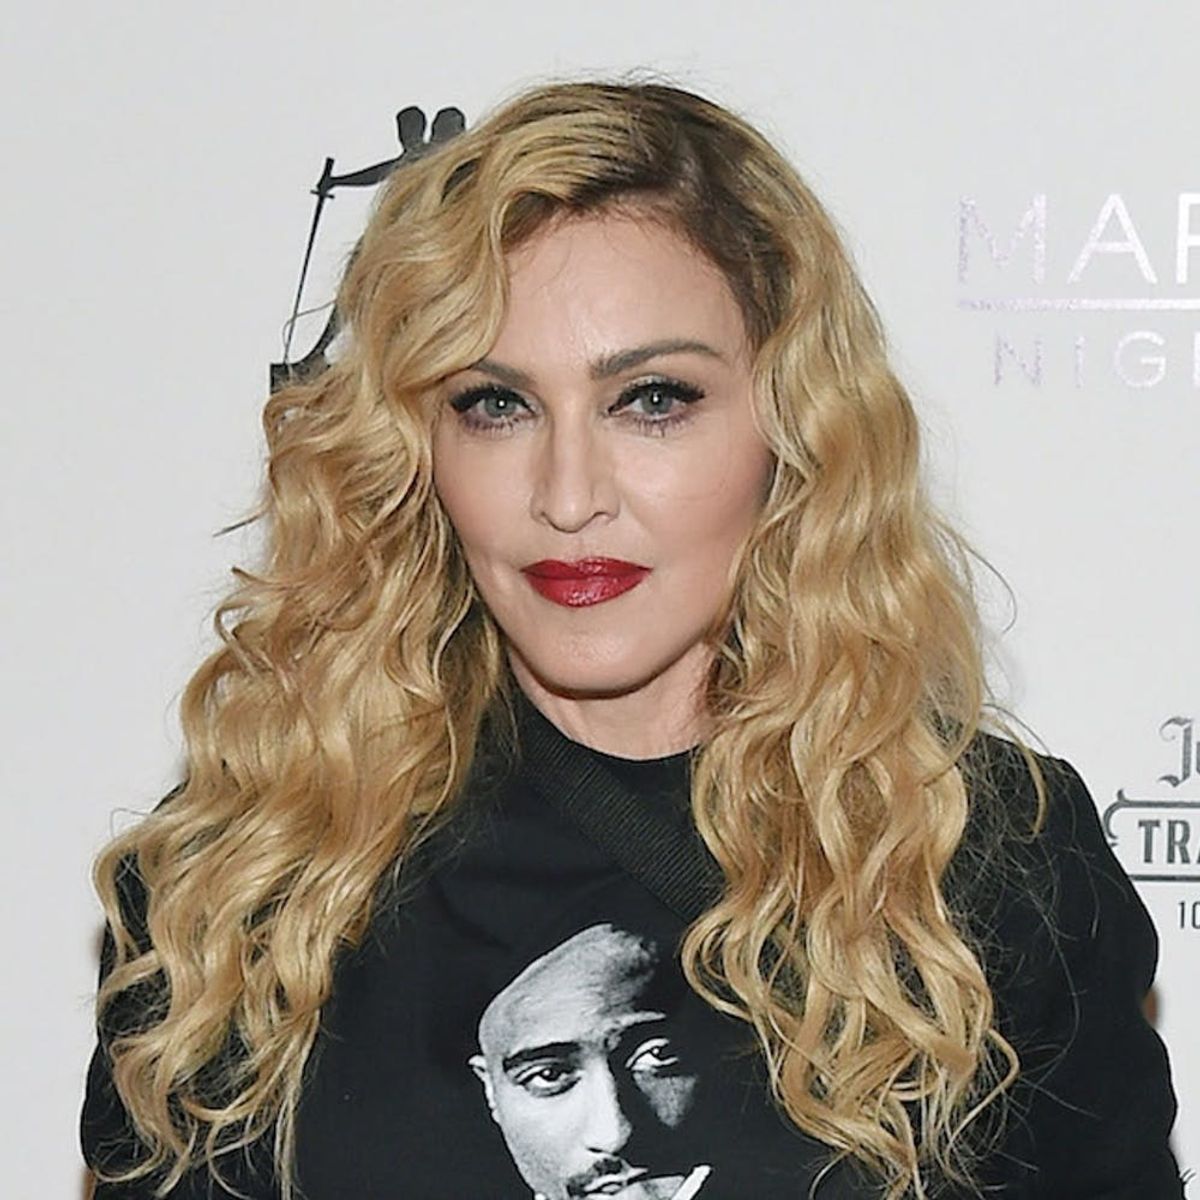 Here’s the Deal With Madonna’s Kind of Terrifying Instagram Pic